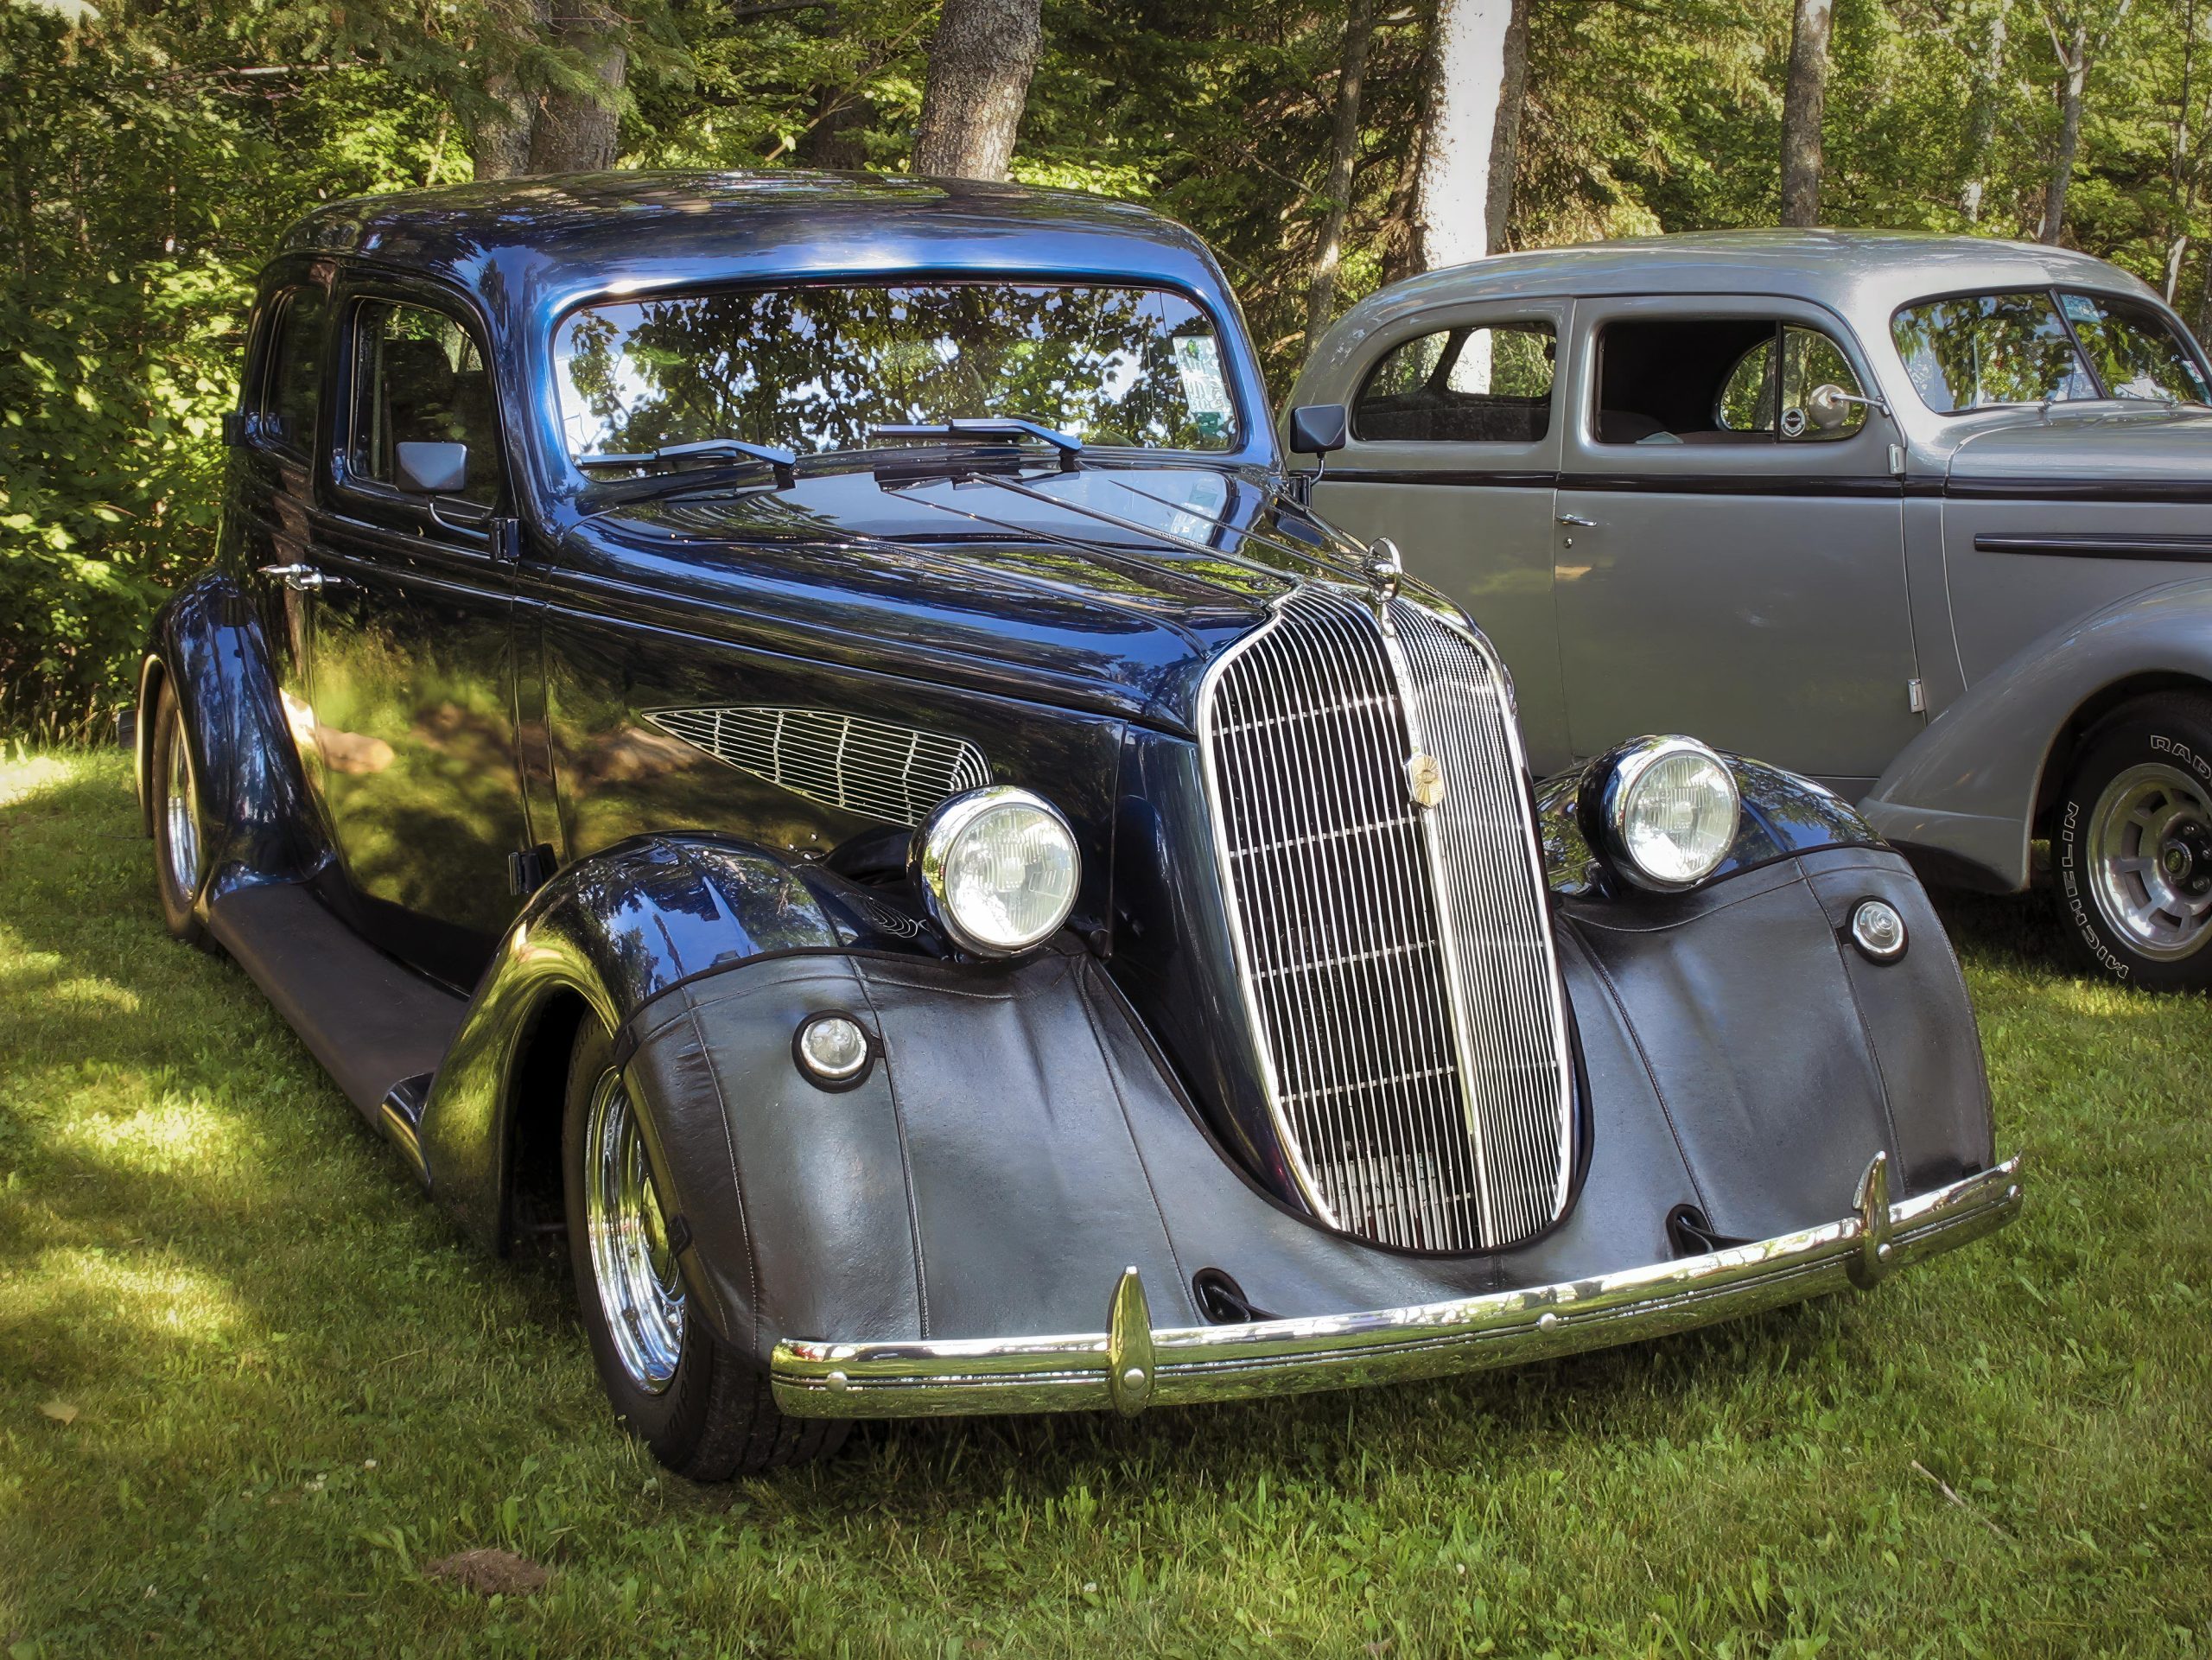 HiBid Sales Top $28.1 Million; Upcoming Auctions Include Classic Cars, Real Estate, Housewares & More